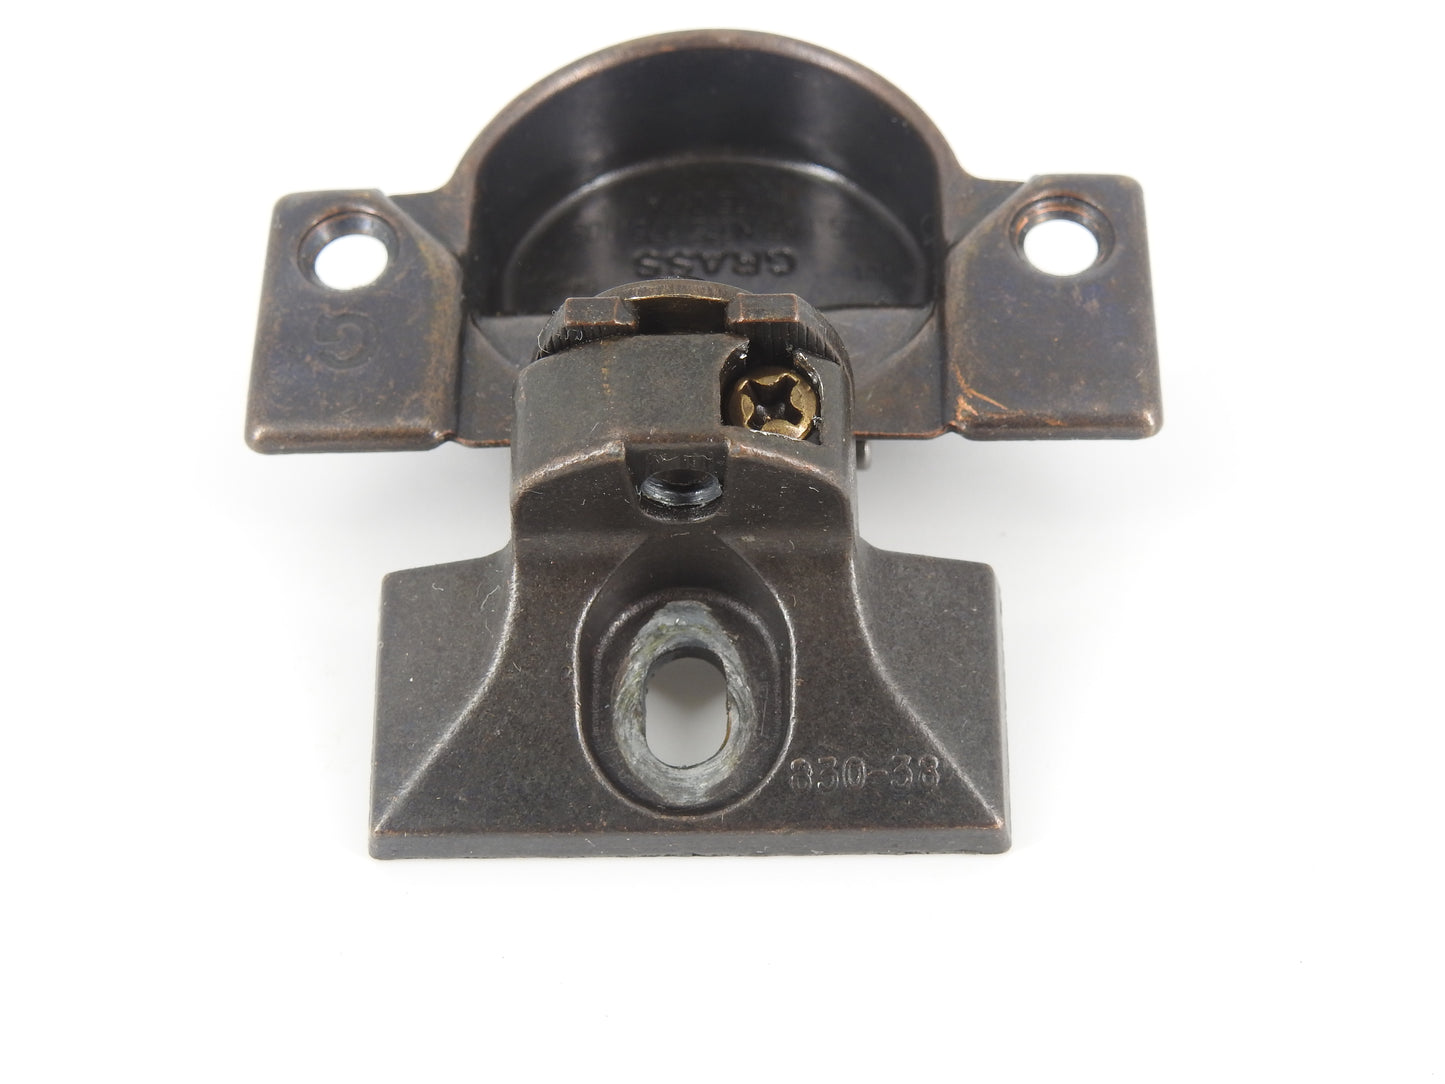 Grass 850 / 830-38 Bronze Hinge and mounting plate - Complete Hinge - Refurbished